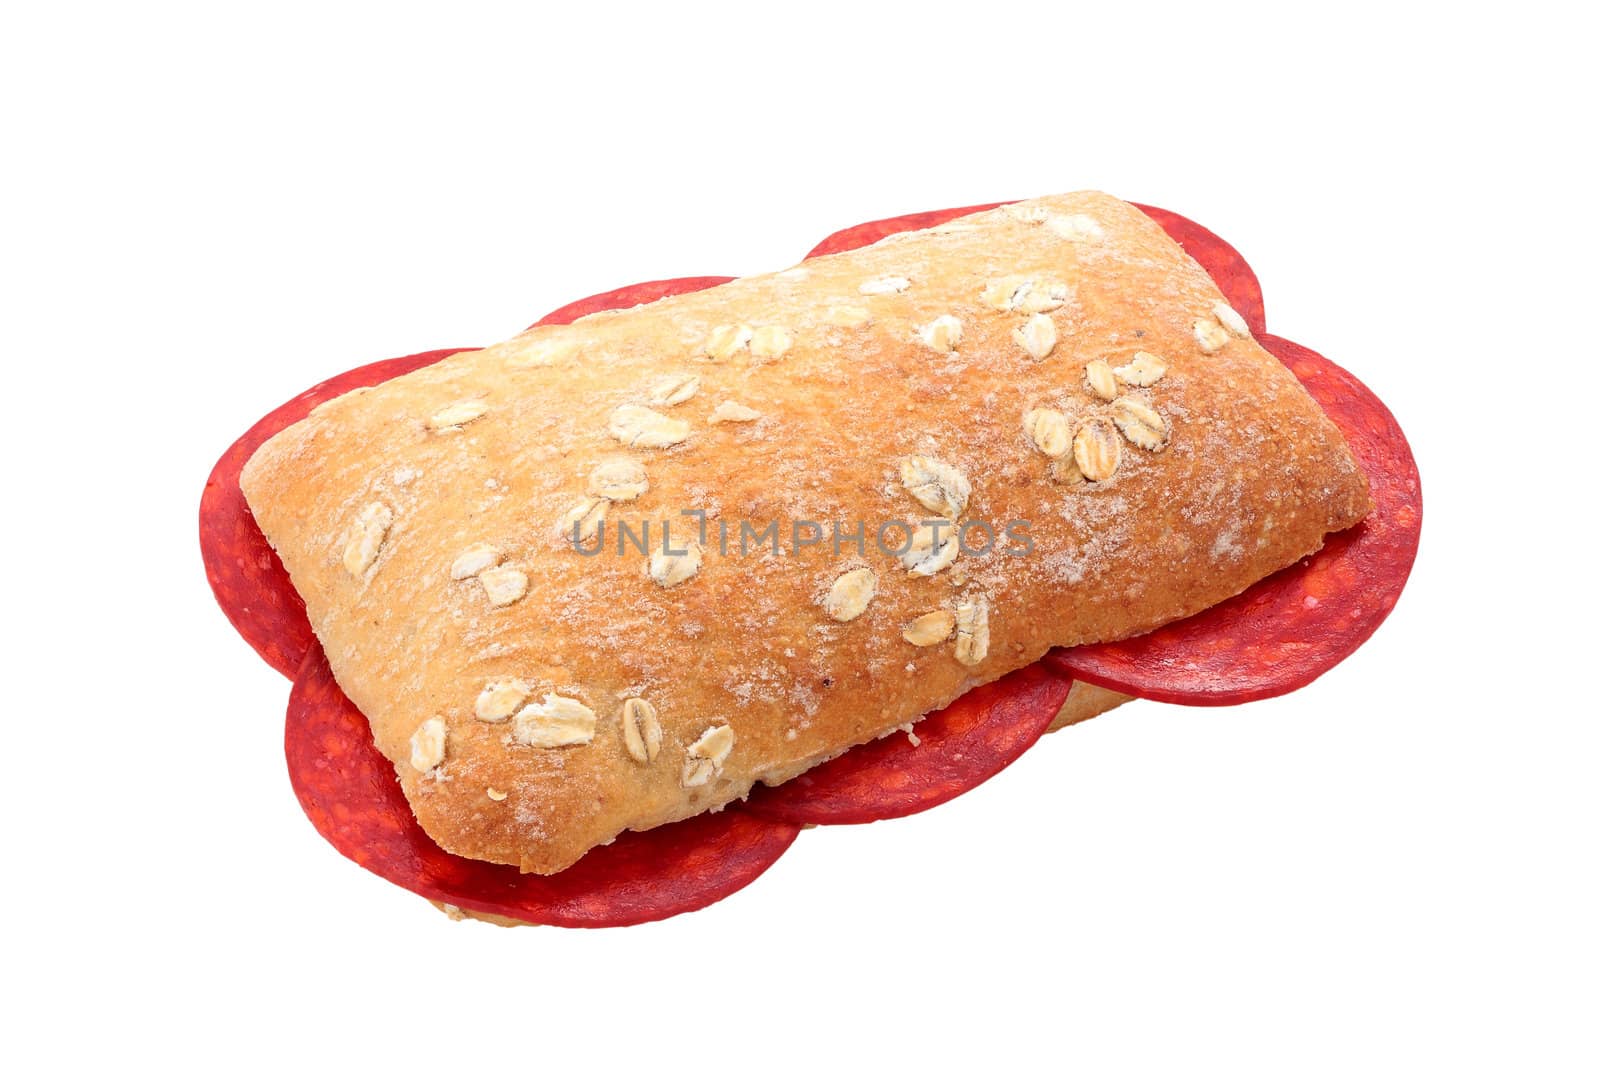 chorizo sausage sandwich bread made ​​with oatmeal and sausage cut into slices and isolated